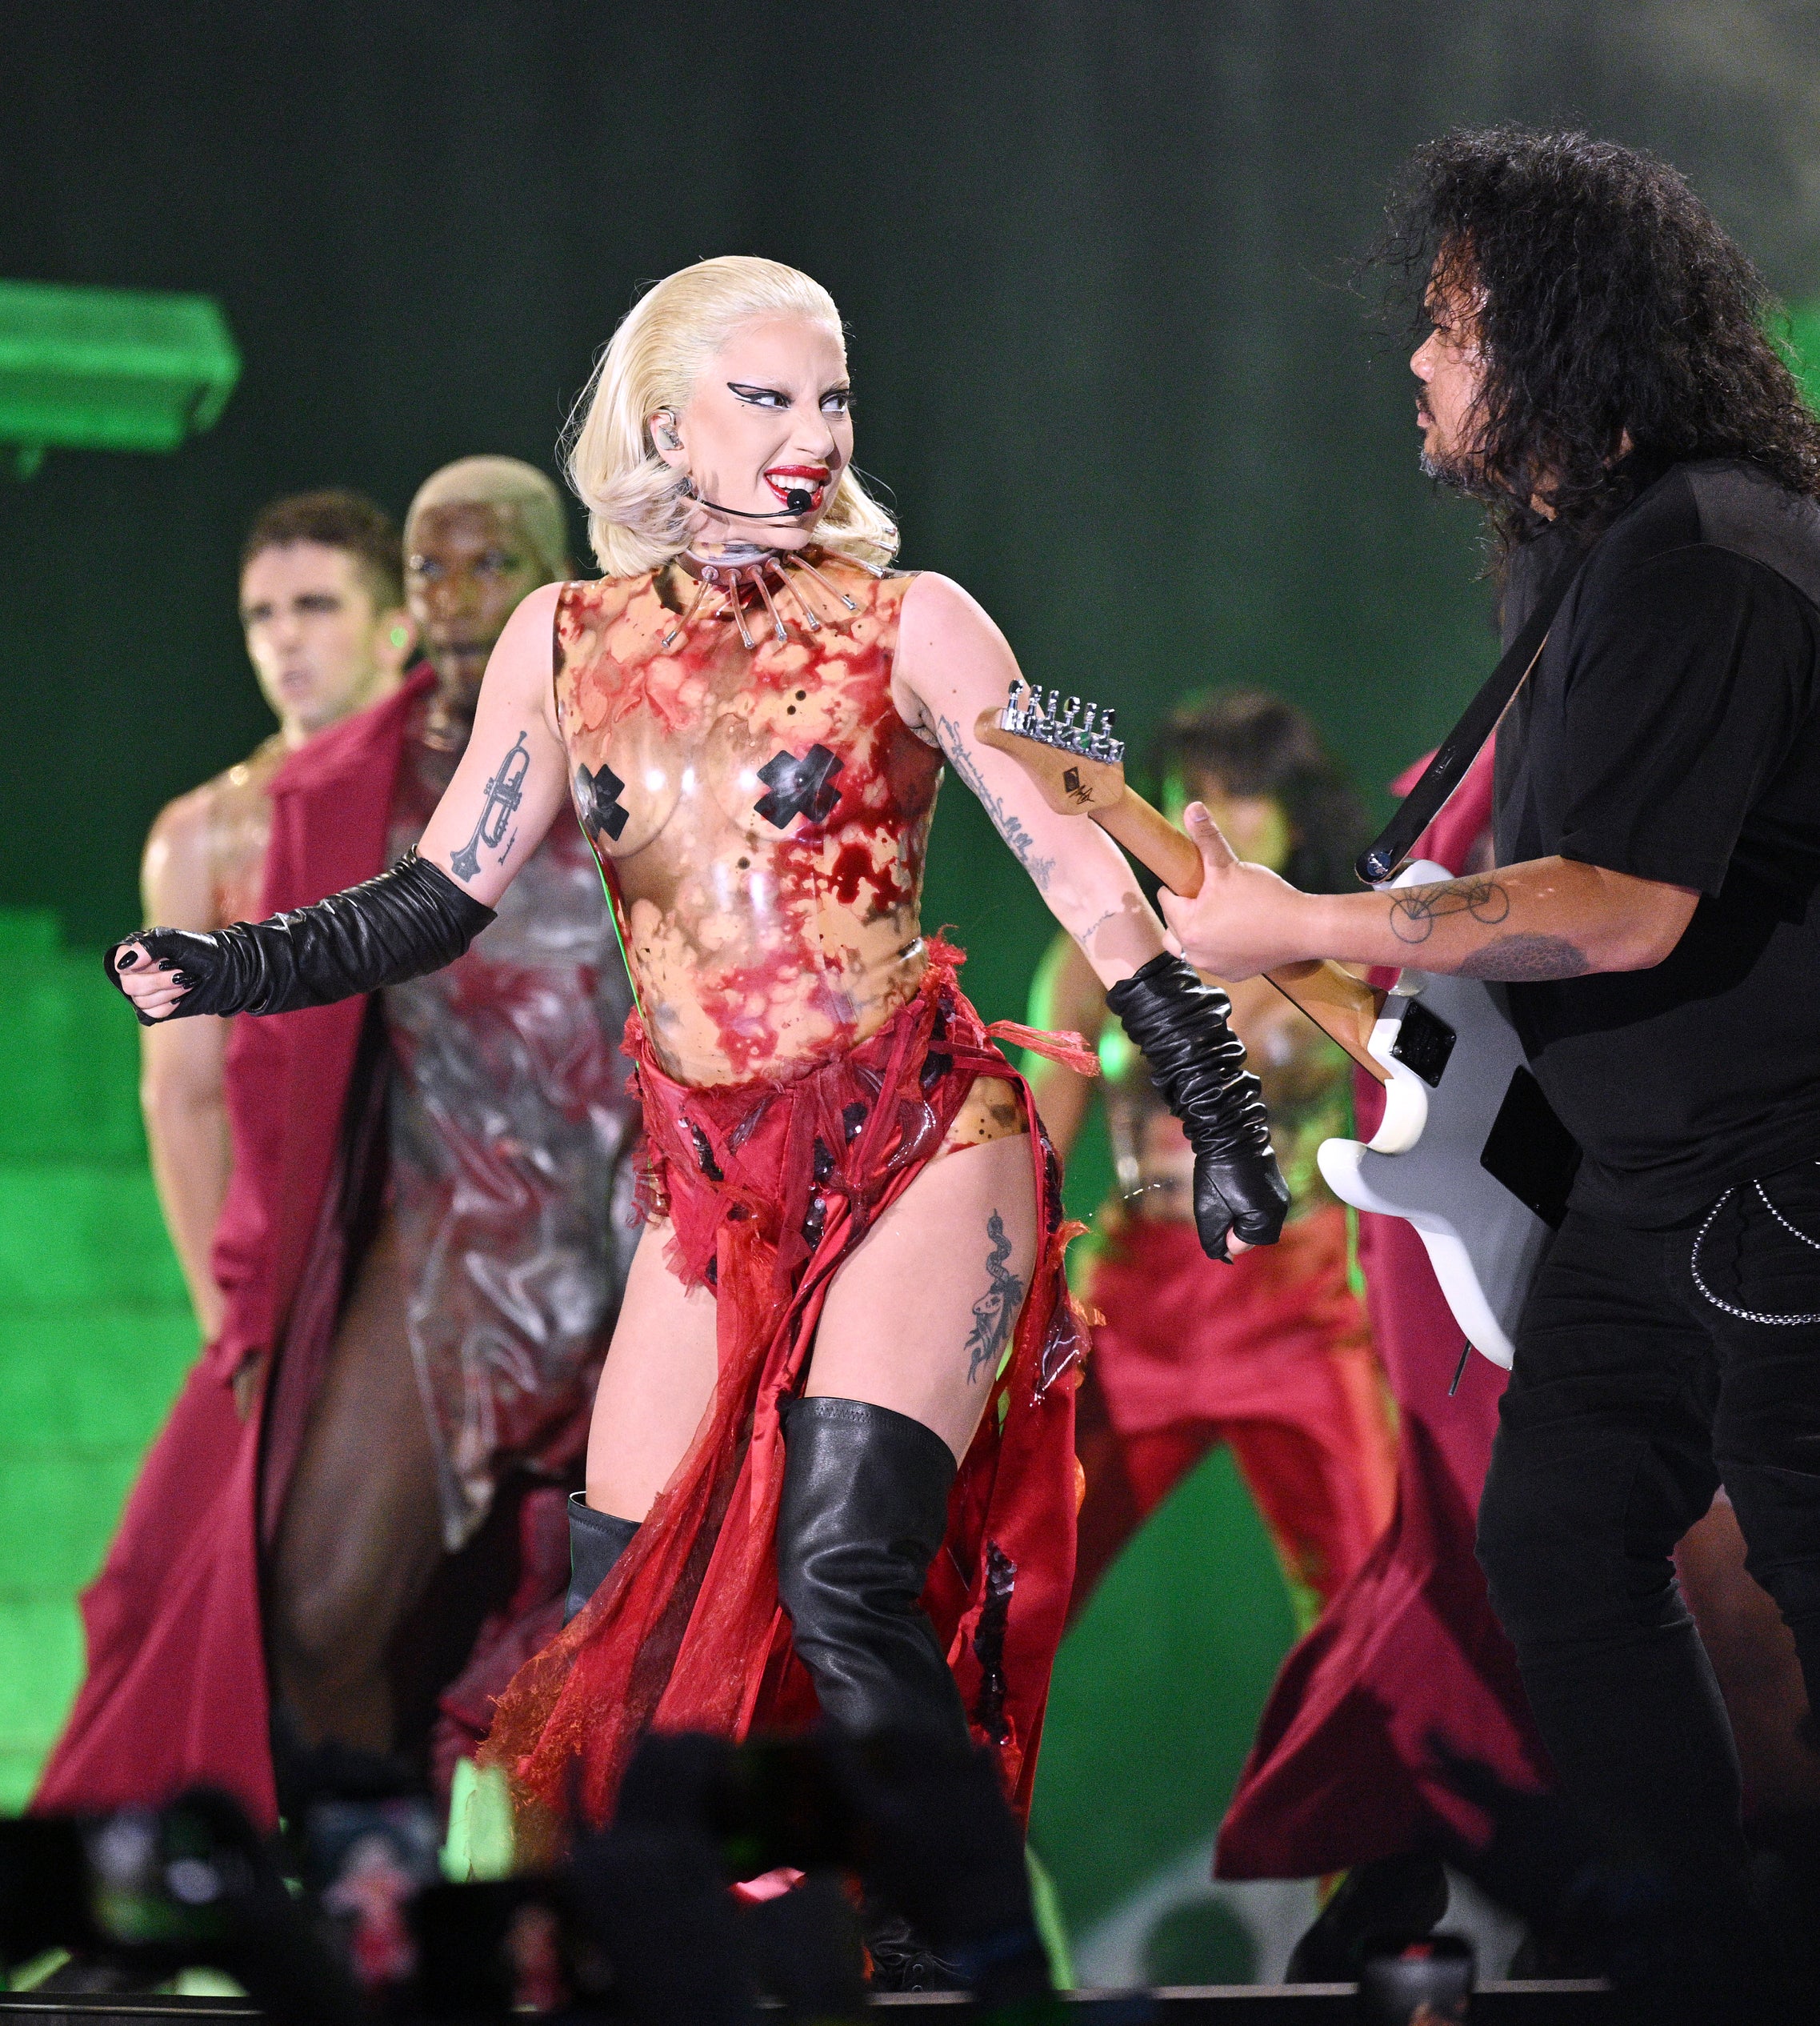 Lady Gaga, in a unique, avant-garde dress, performs with guitarist on stage, surrounded by backup dancers in futuristic attire